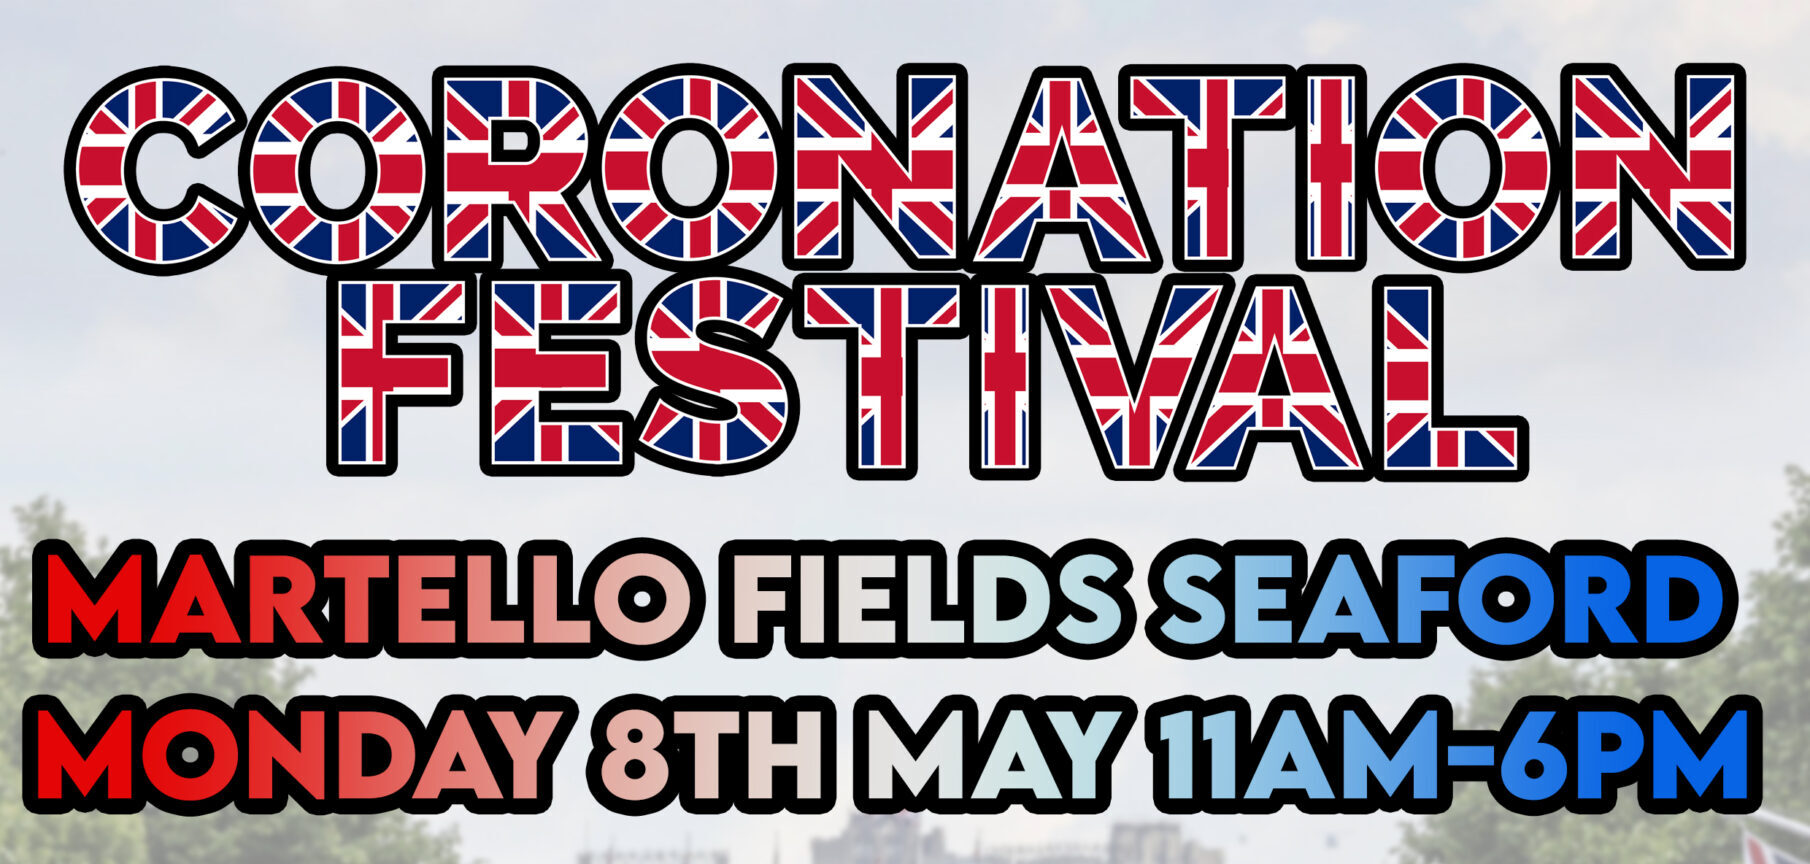 Banner in union jack colours with the wording "Coronation Festival Martello Fields Monday 8th May 11am until 6pm"